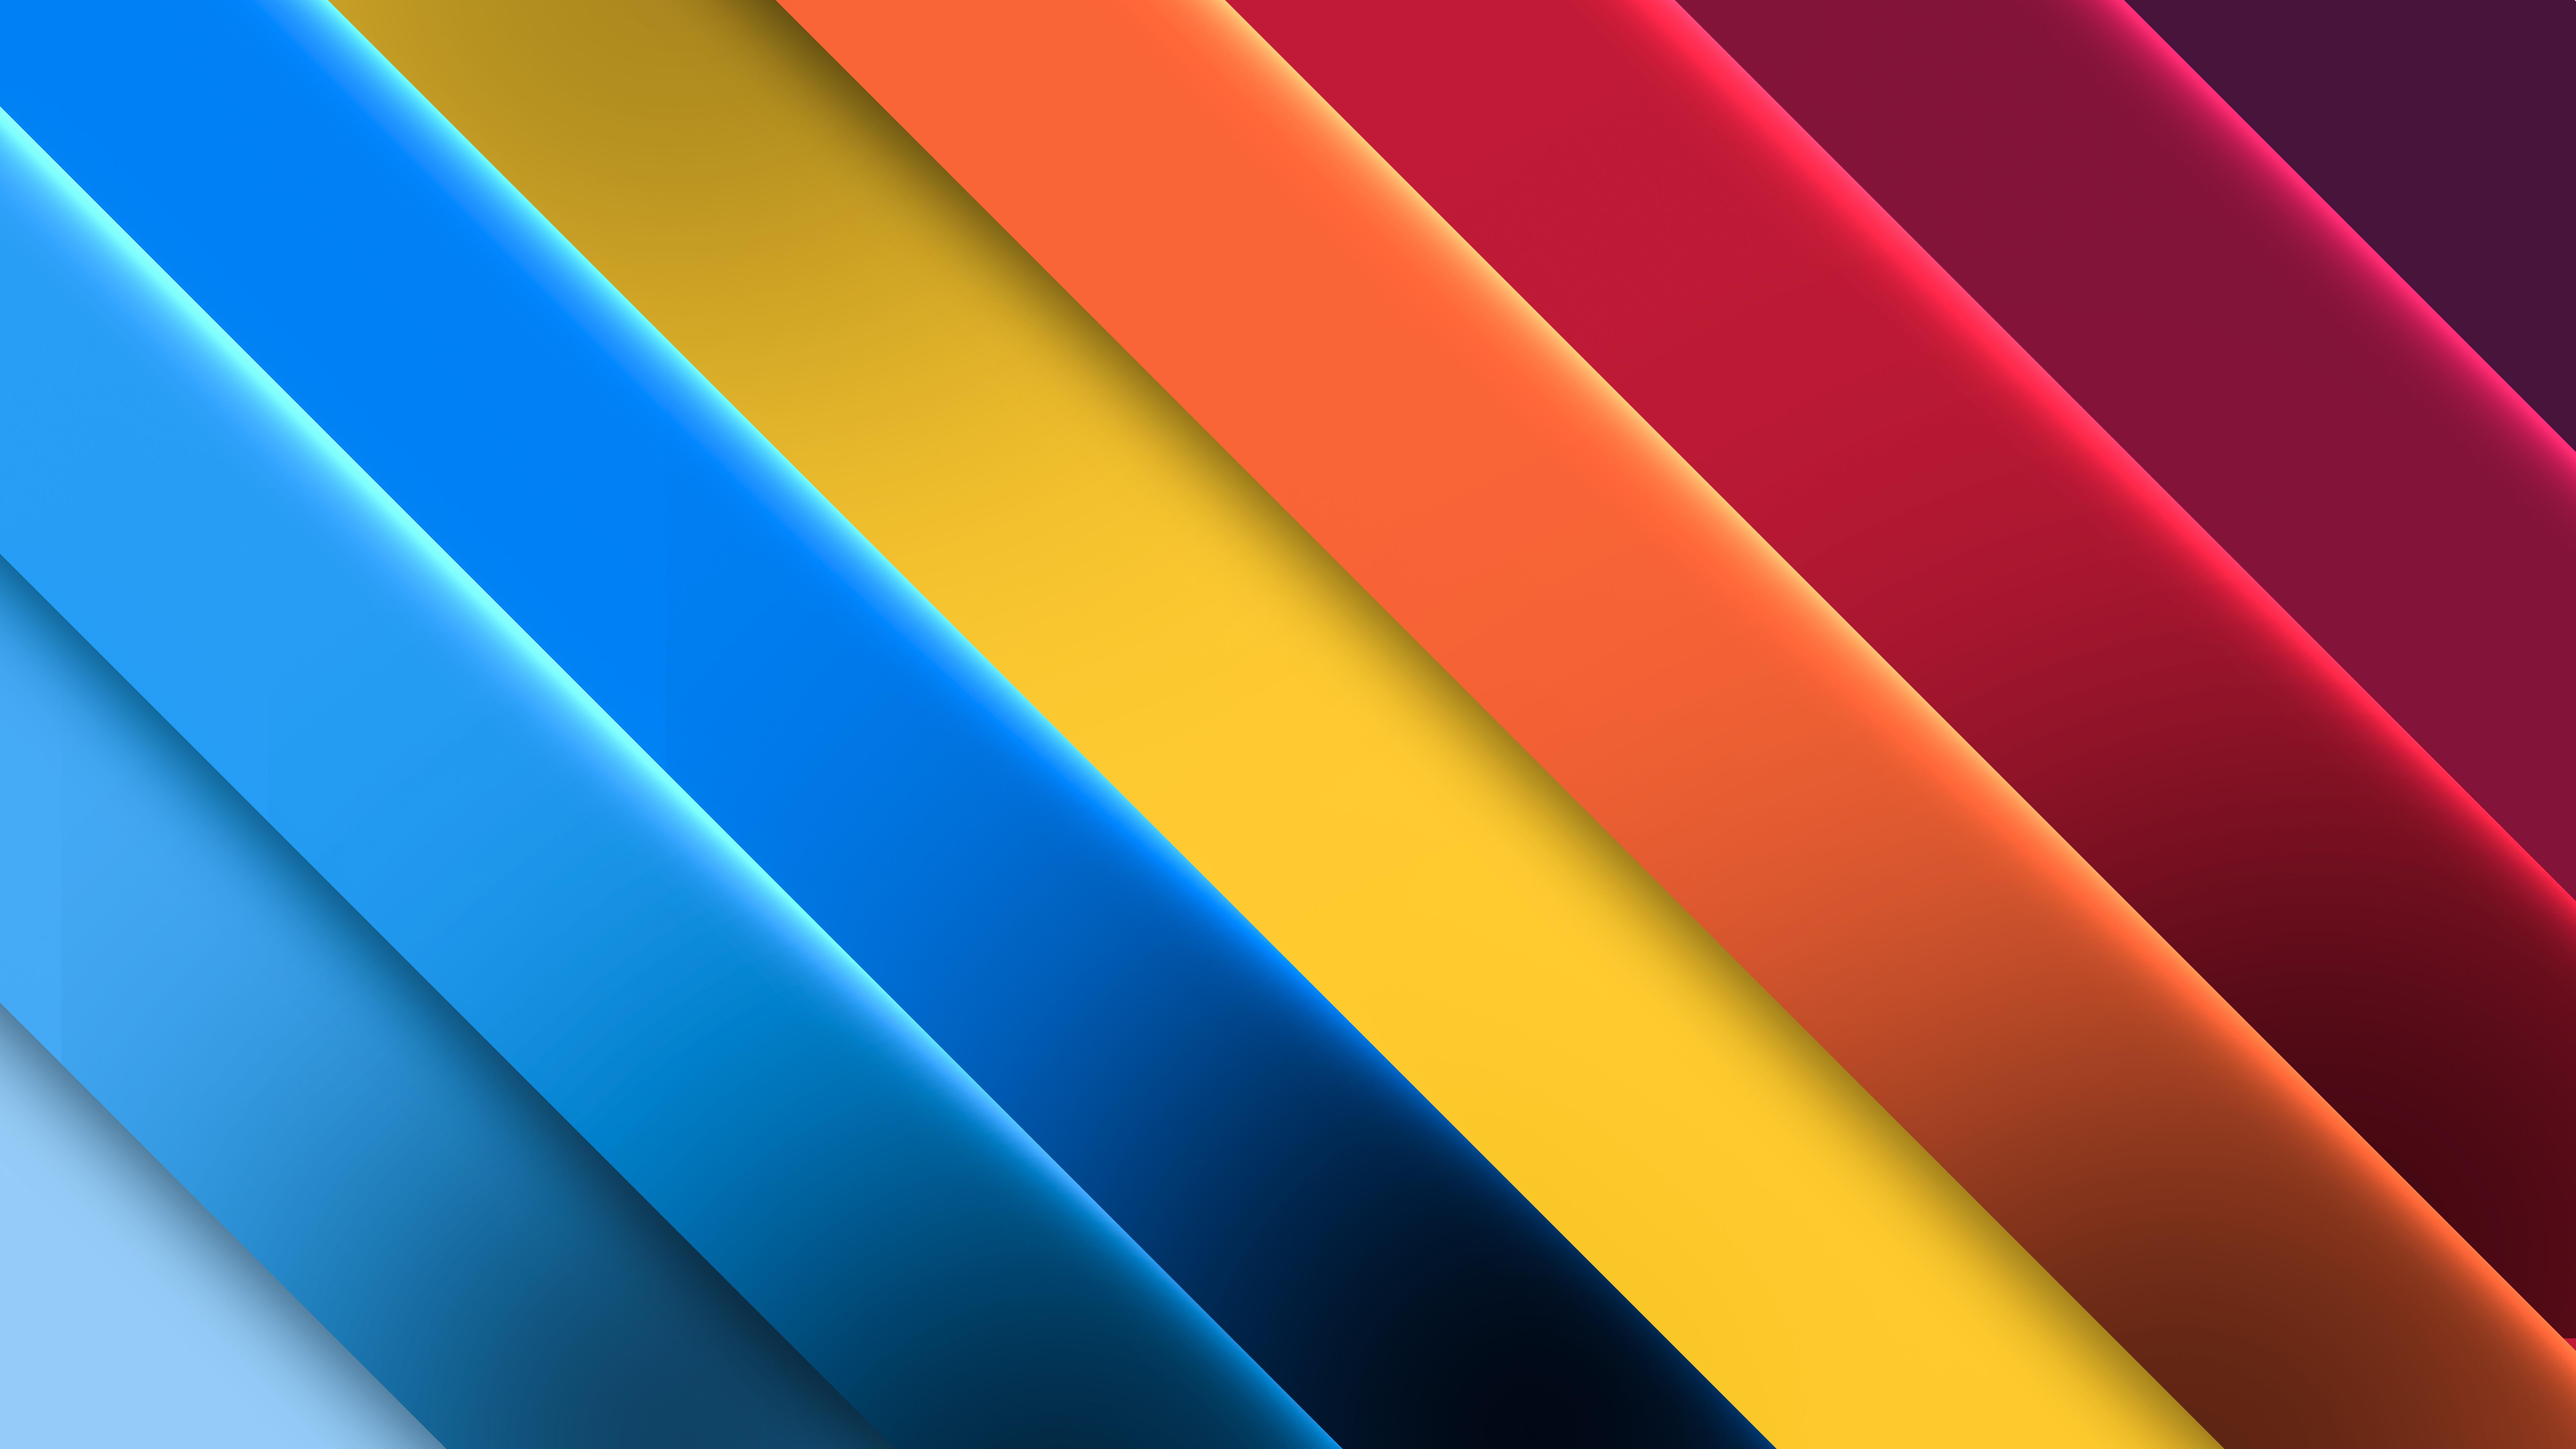 Simple 4K wallpaper for your desktop or mobile screen free and easy to download